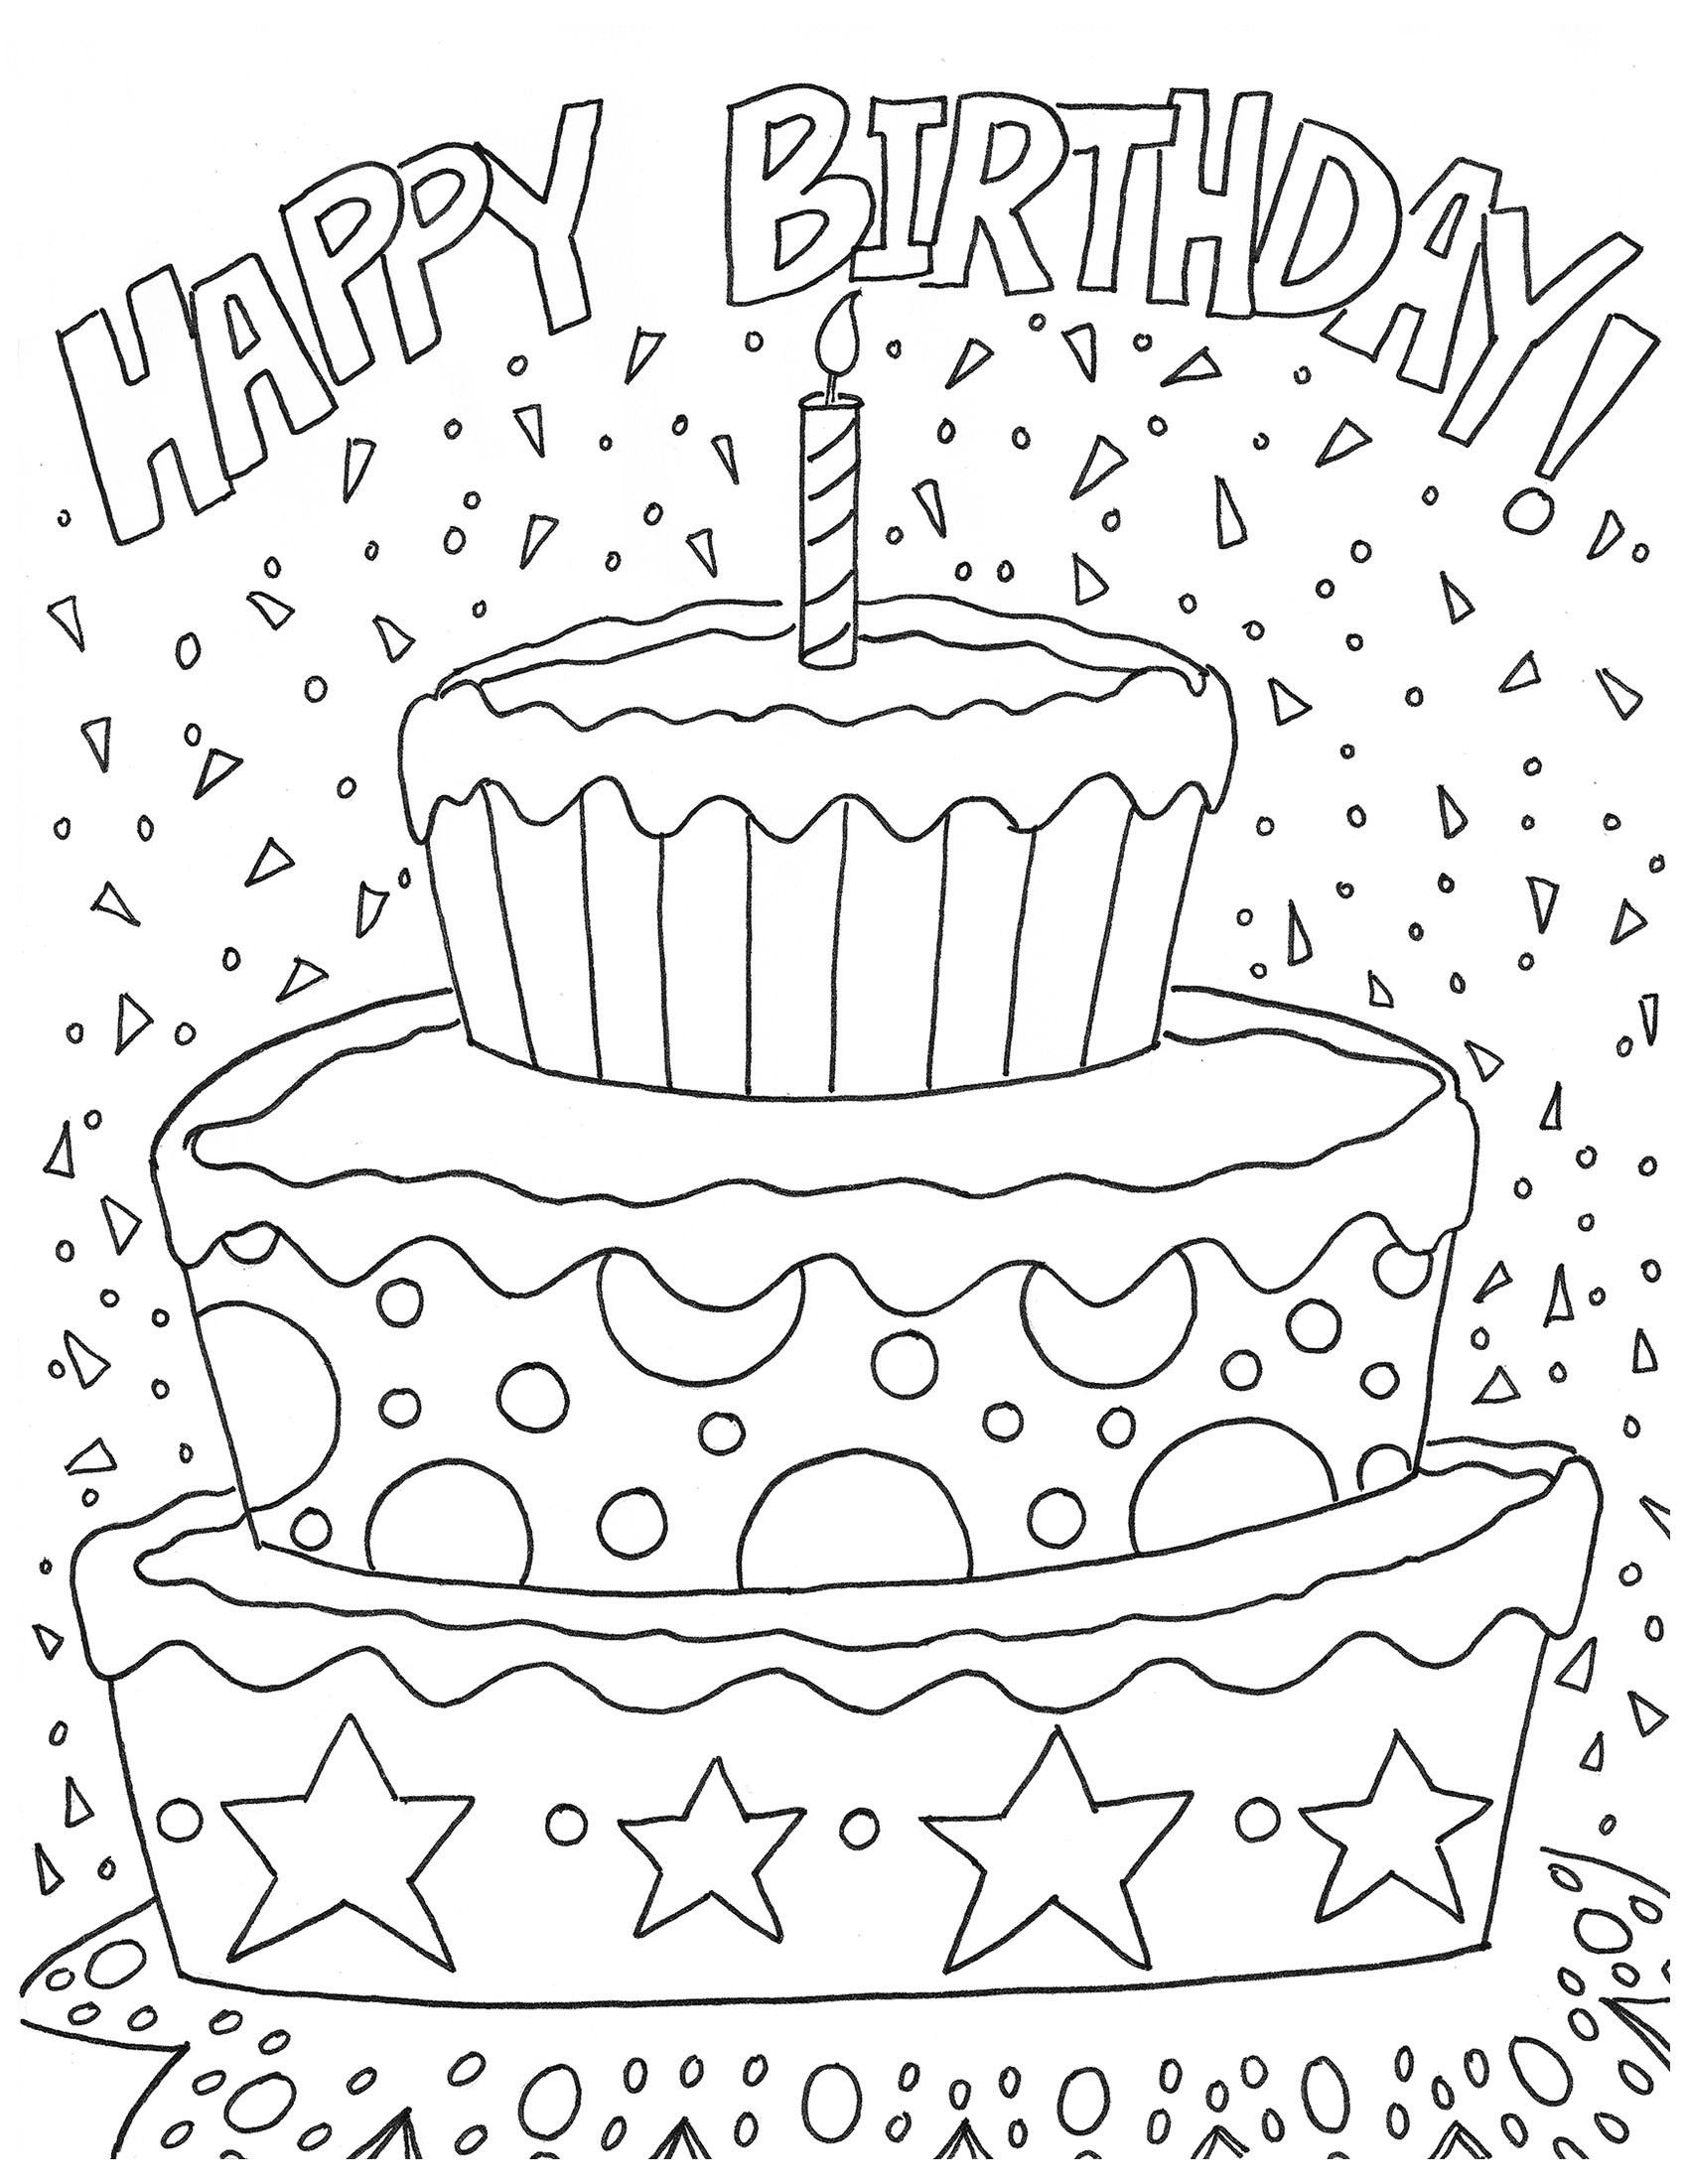 Happy 6th Birthday Coloring Pages At GetColorings Free Printable Colorings Pages To Print 